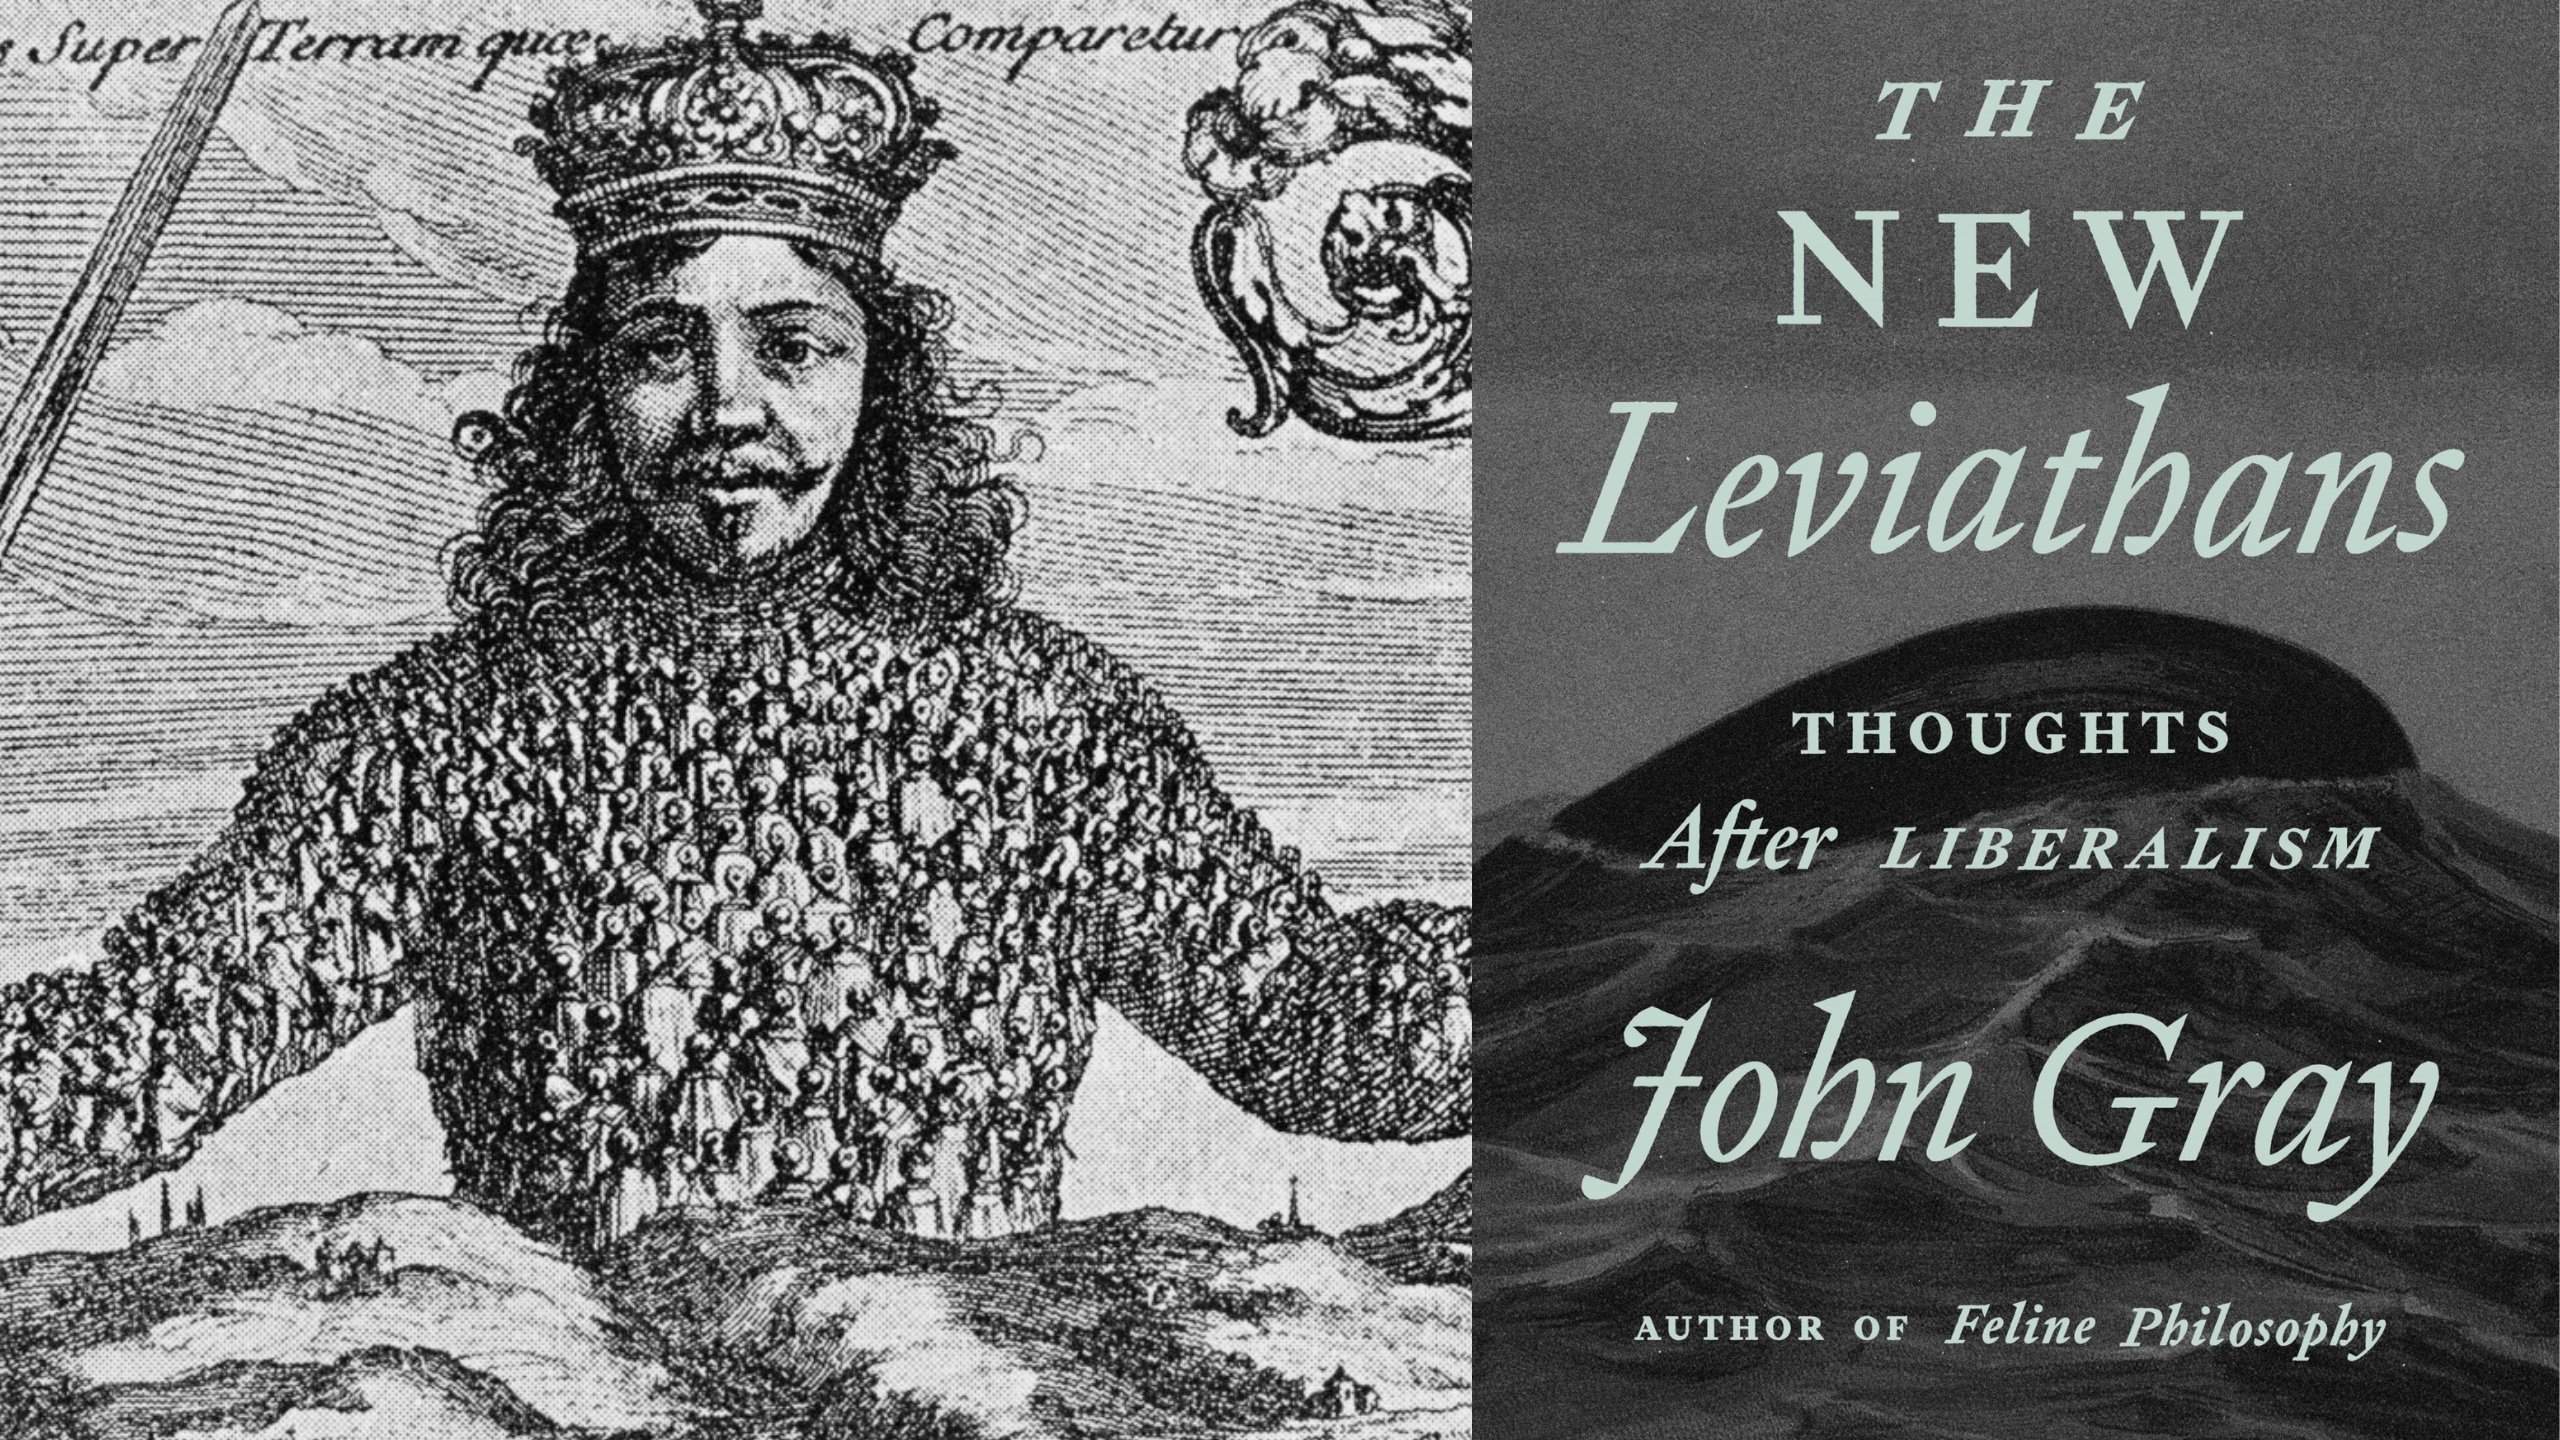 Left: Cover illustration of Leviathan, by Thomas Hobbes, circa 1650 (Photo by Kean Collection/Getty Images); right: The New Leviathans book cover